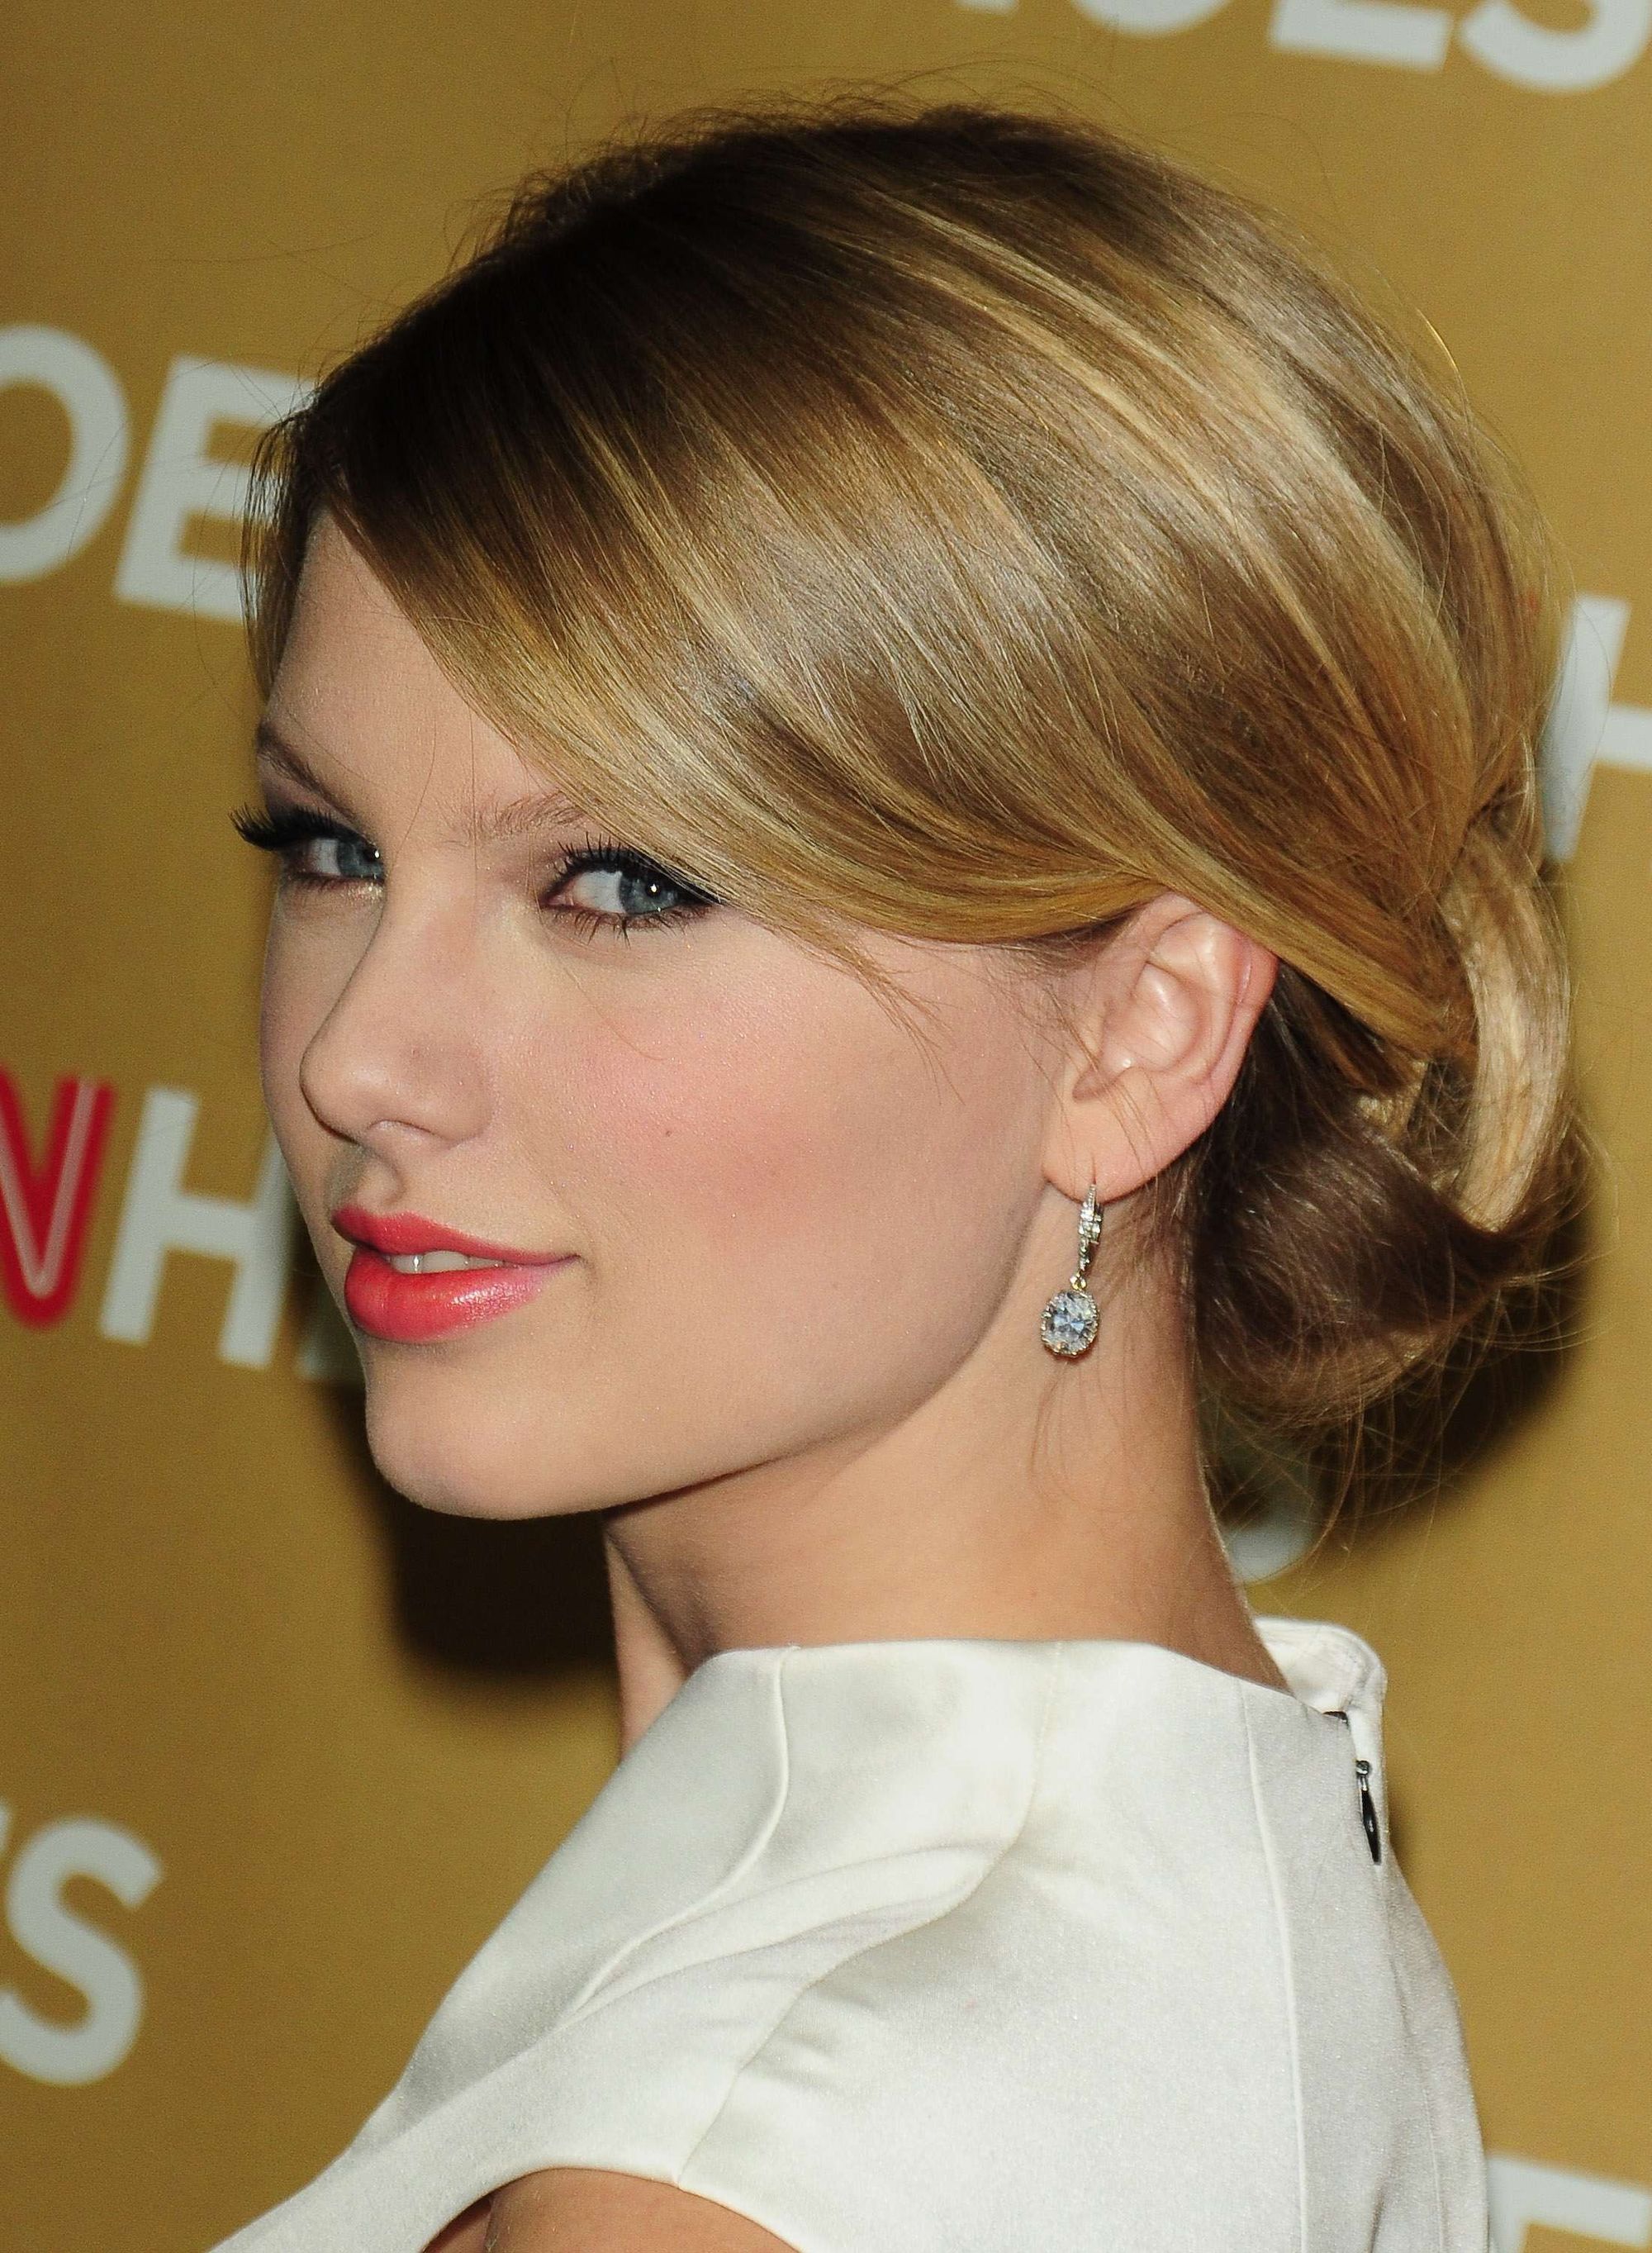 singer taylor swift in 2008 with a sleek updo hairstyle